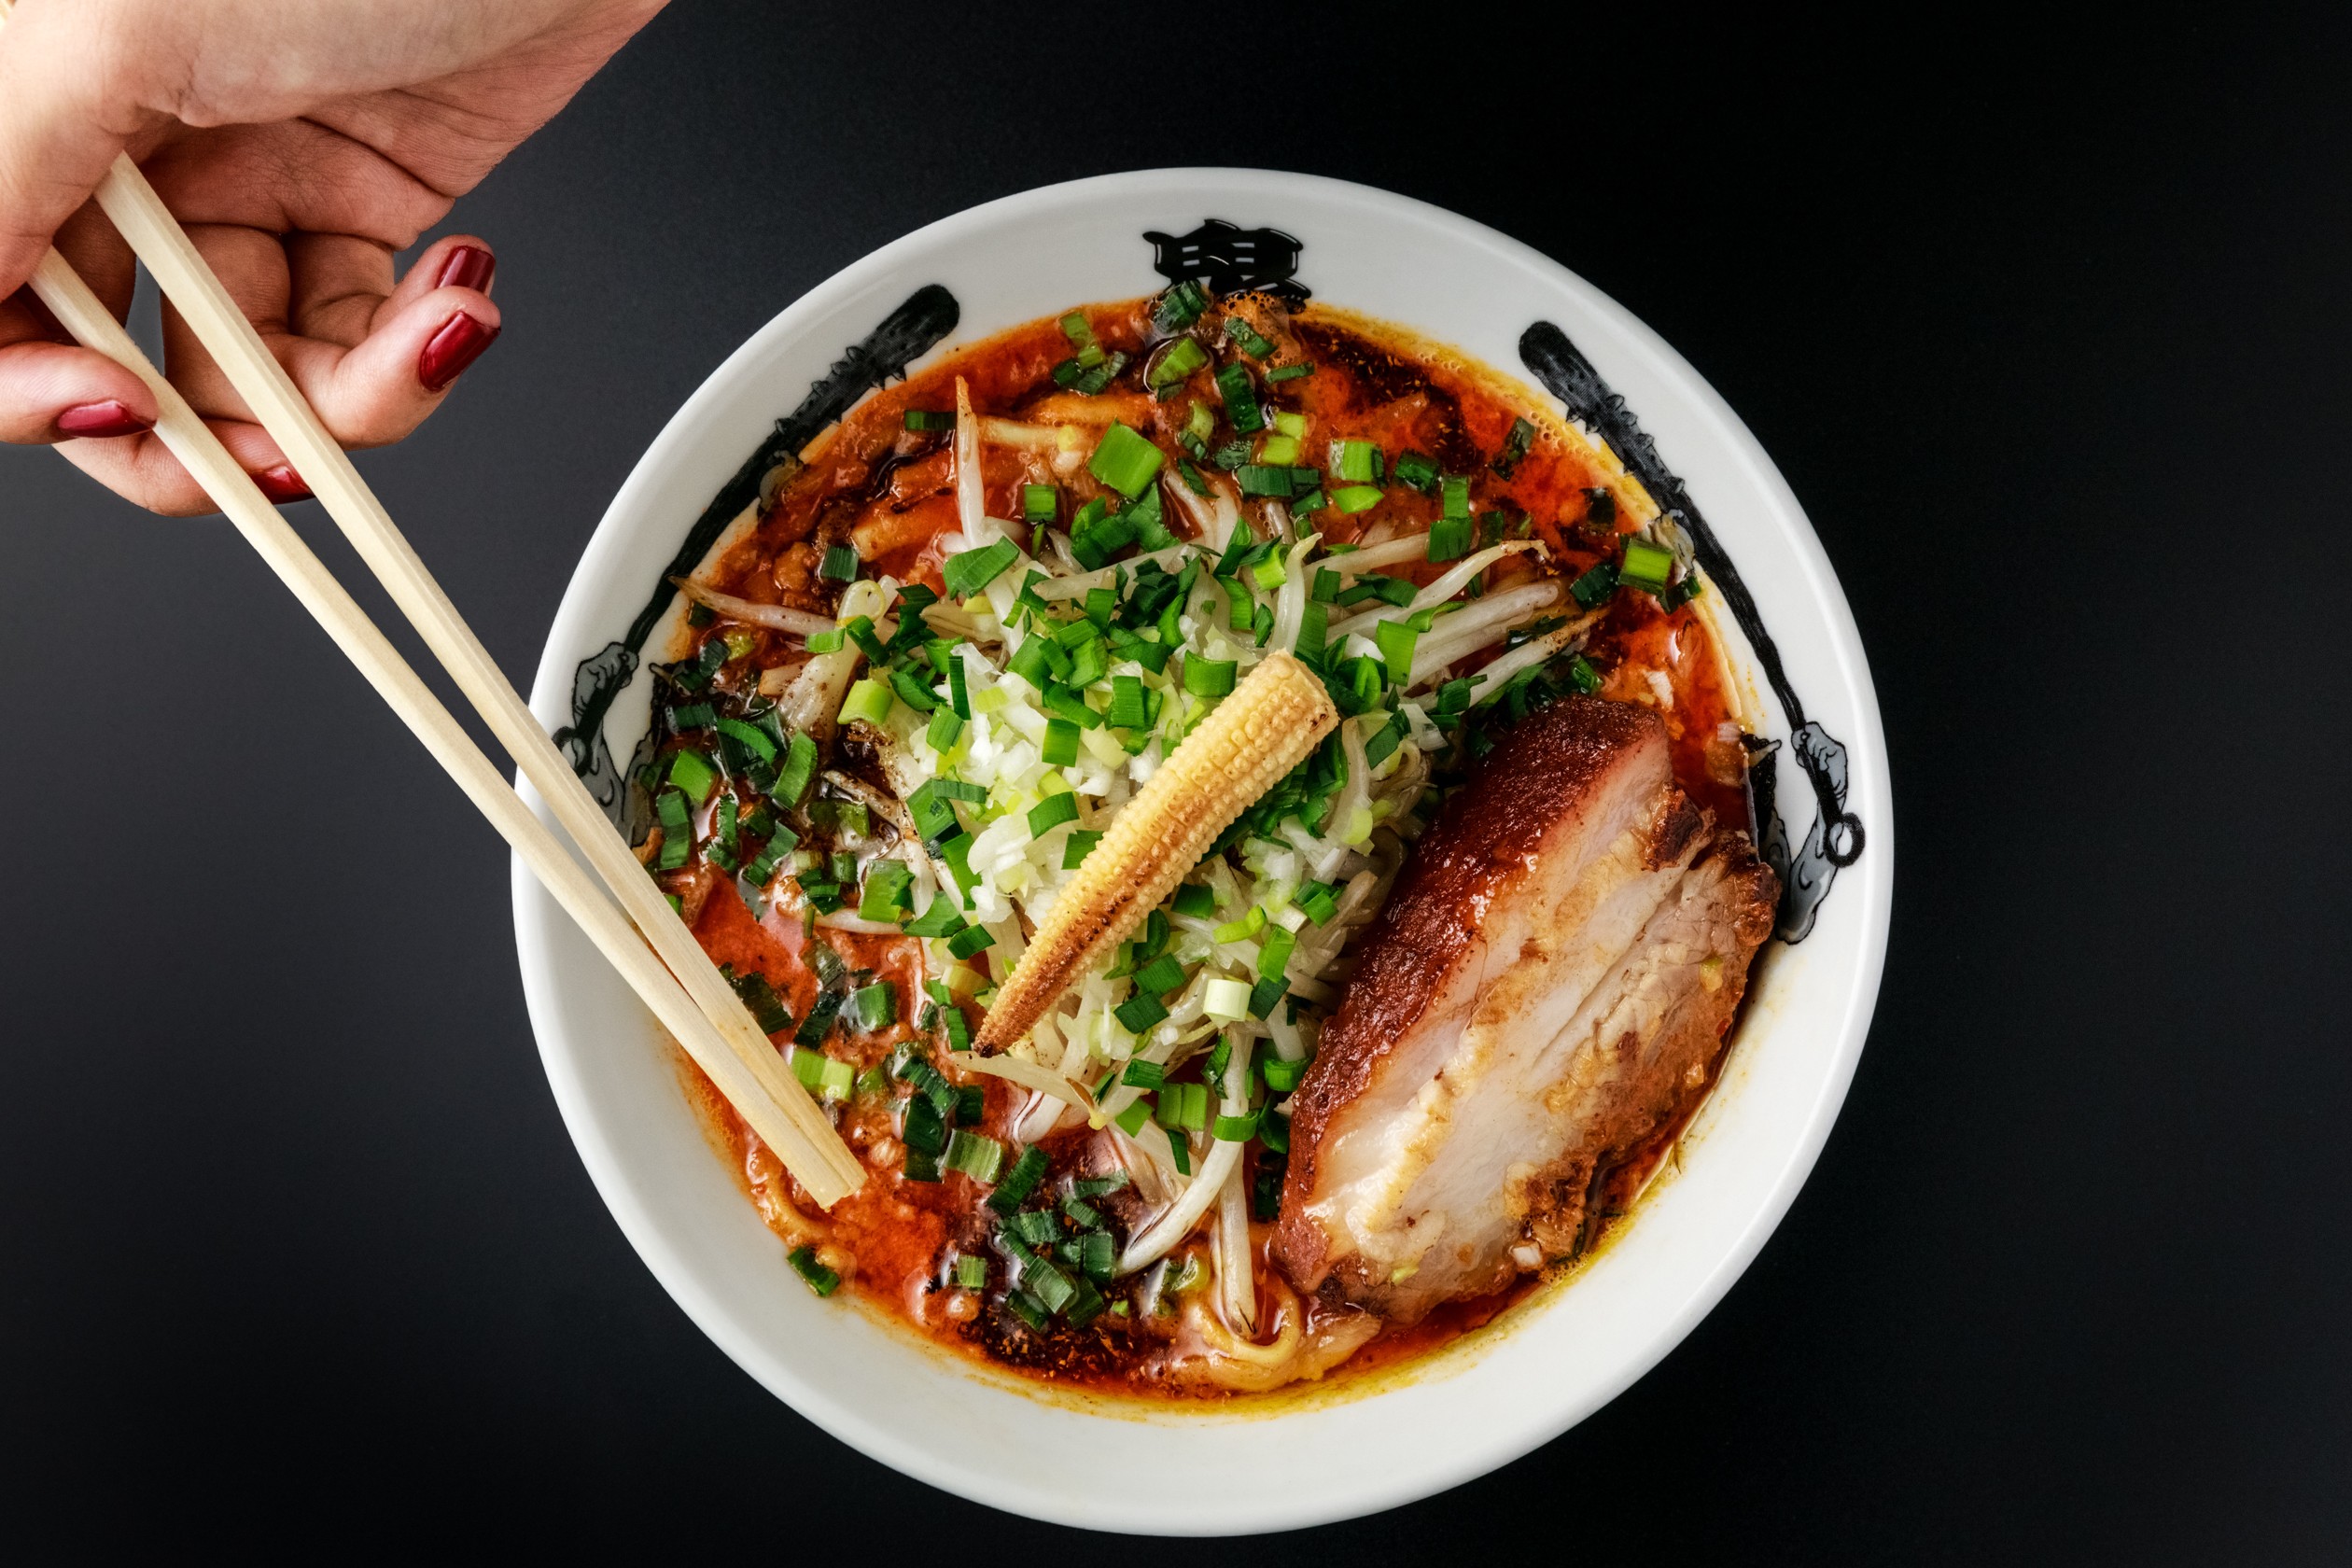 You will soon be able to try Kikanbo’s famous Karashibi miso ramen when the restaurant opens in Causeway Bay this month.